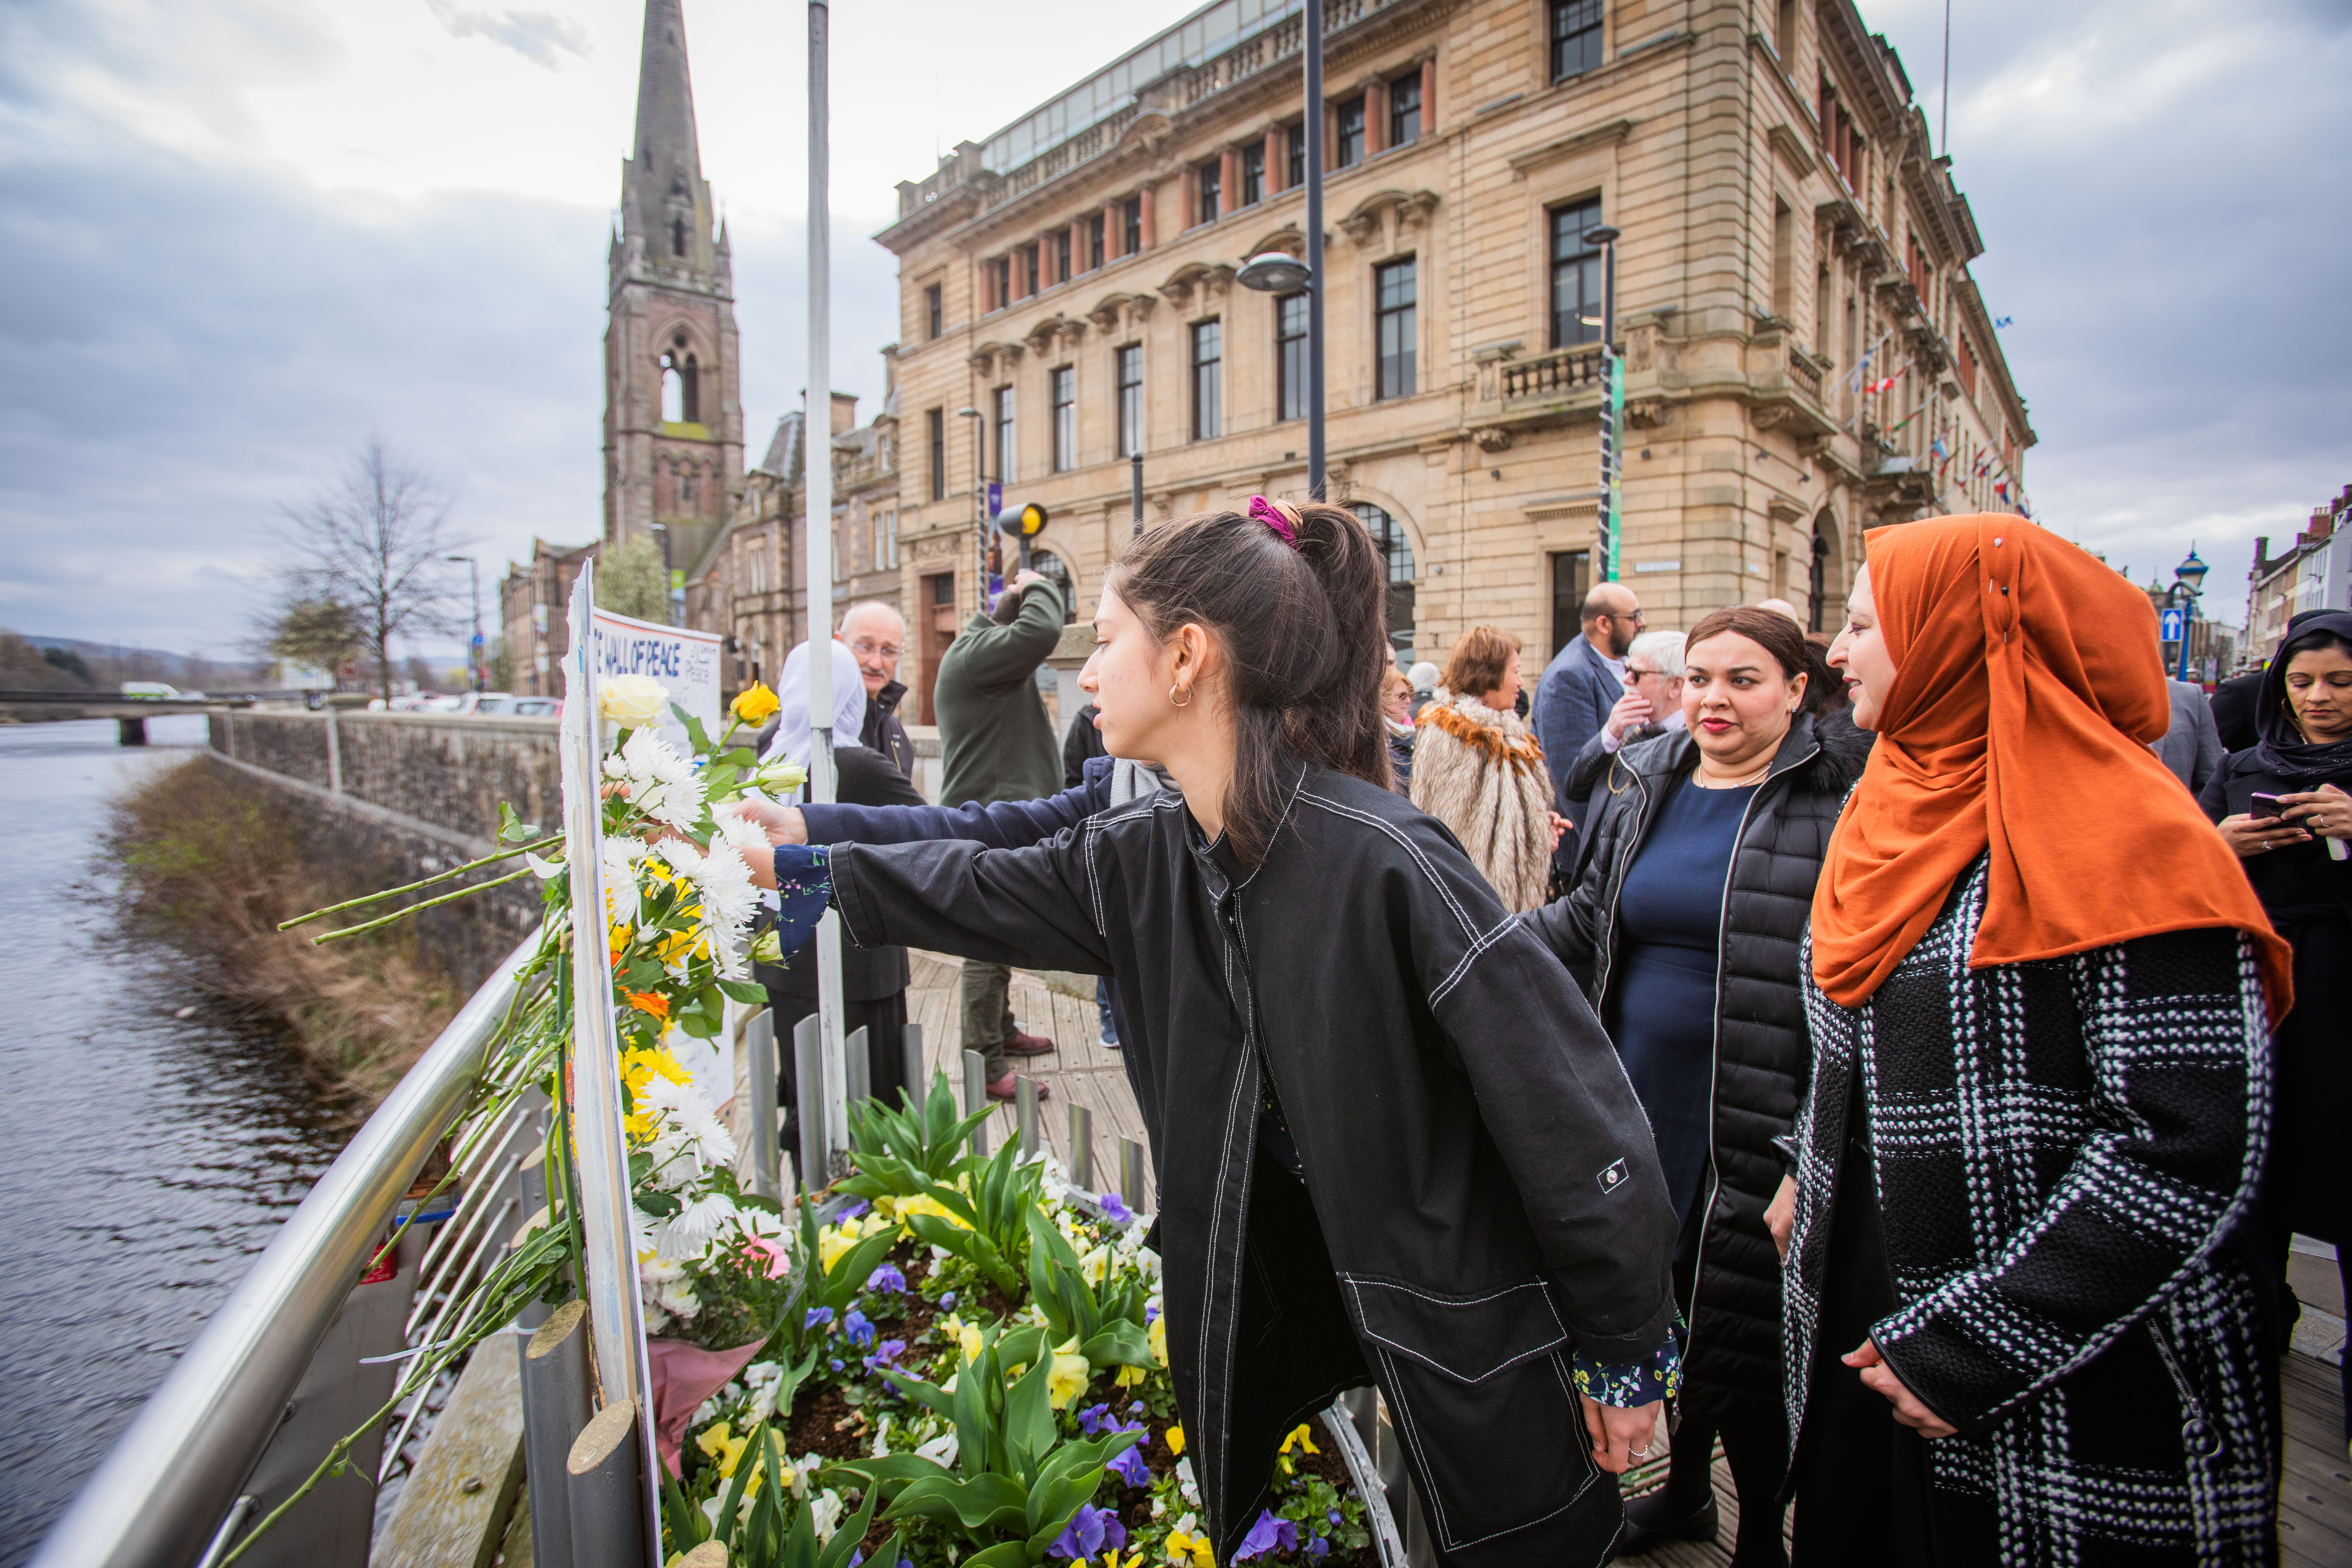 People brought flowers to pay their respects at the Peace Vigil in Perth.